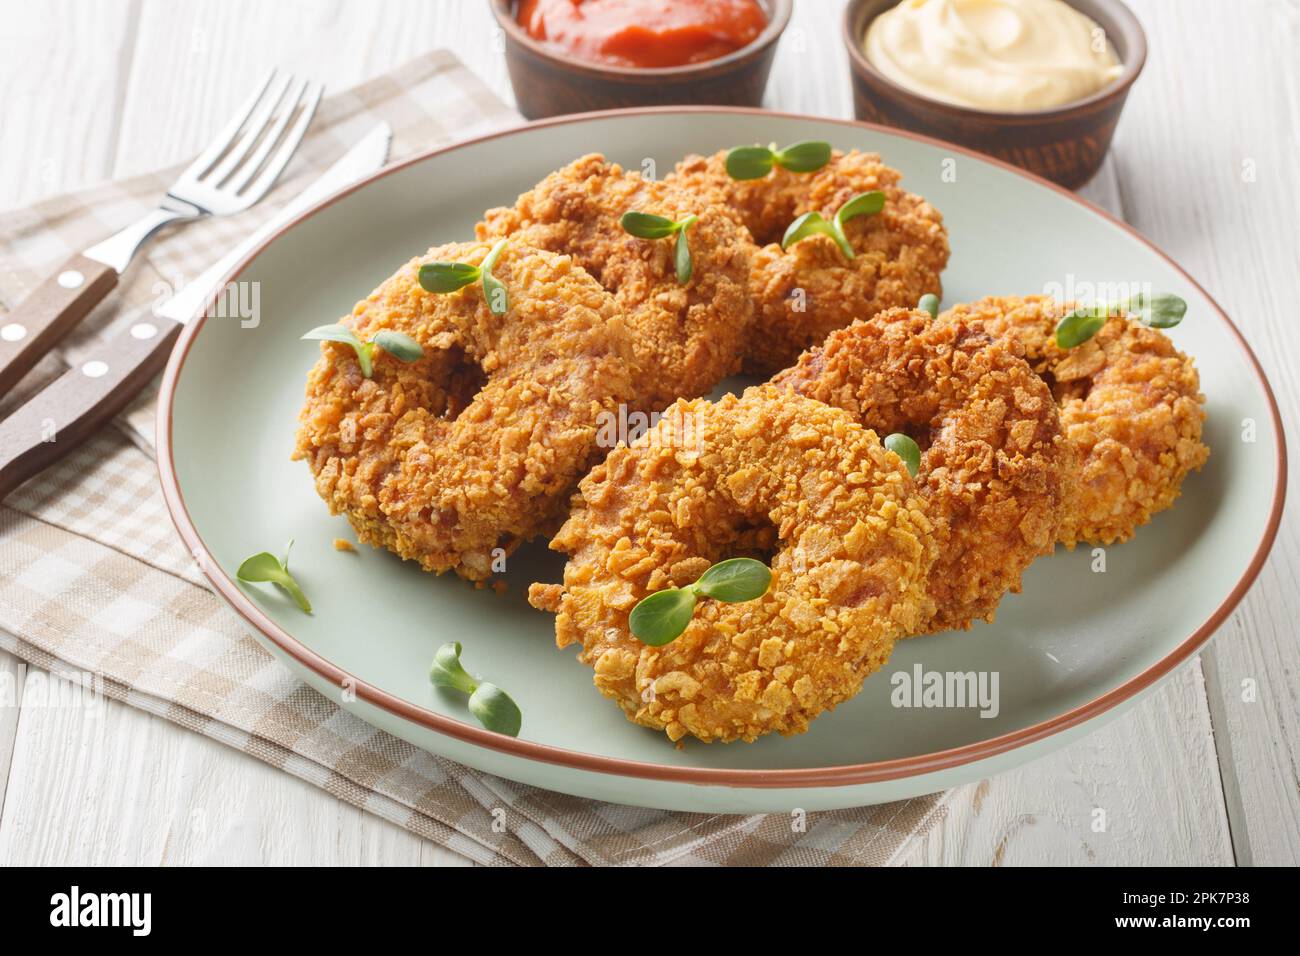 Fried crispy breaded chicken donuts close-up on a plate on the table. Horizontal Stock Photo